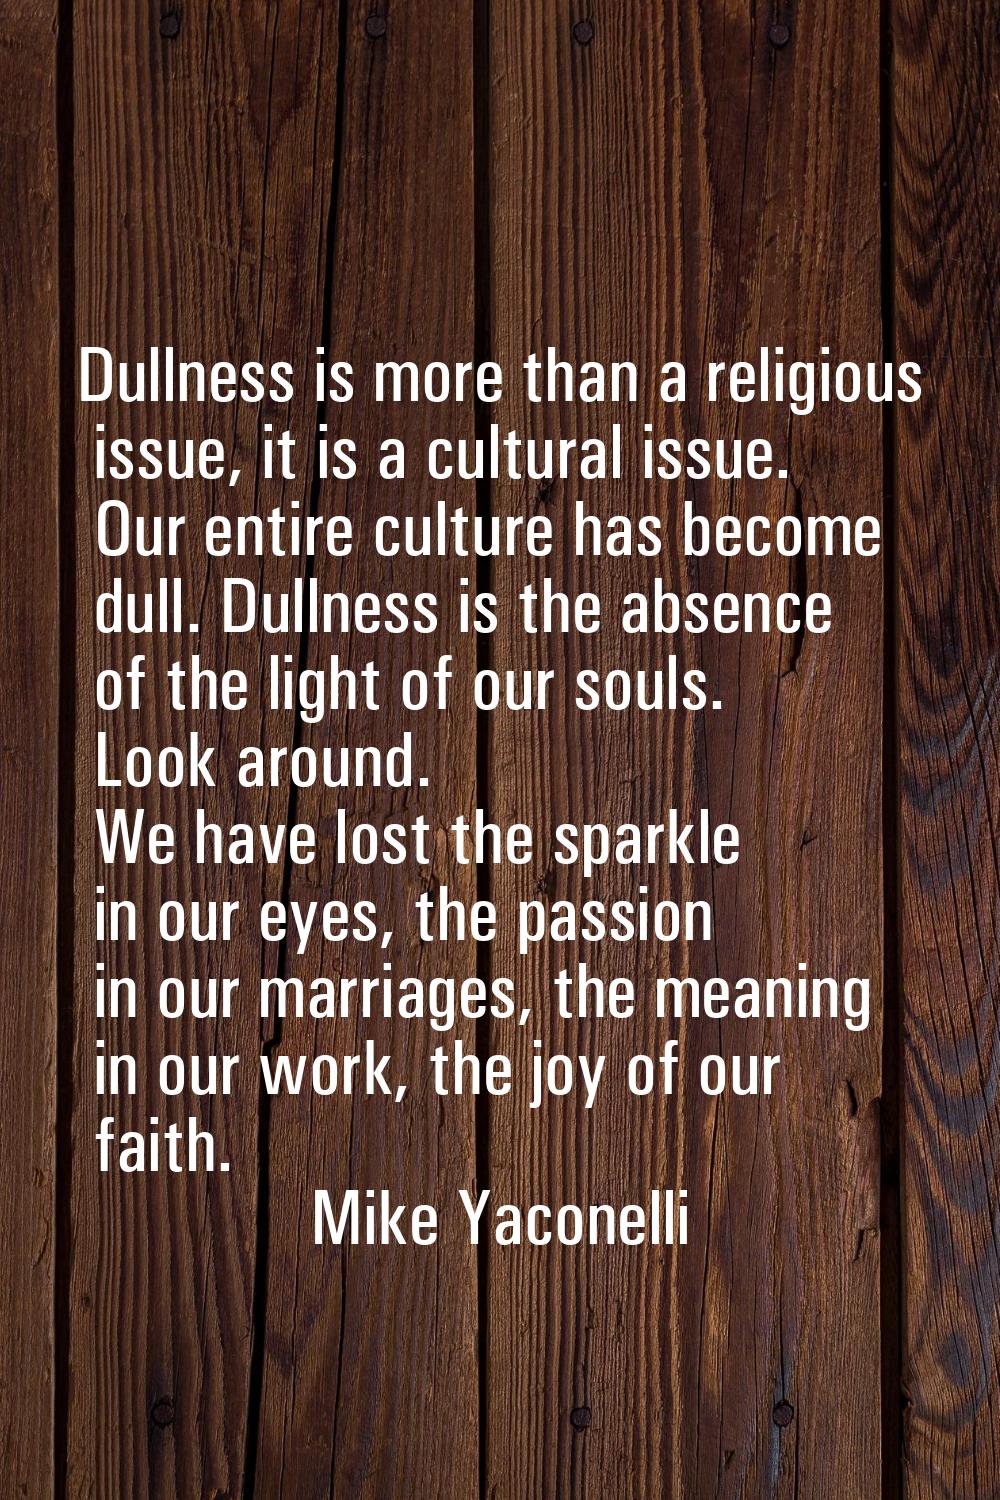 Dullness is more than a religious issue, it is a cultural issue. Our entire culture has become dull